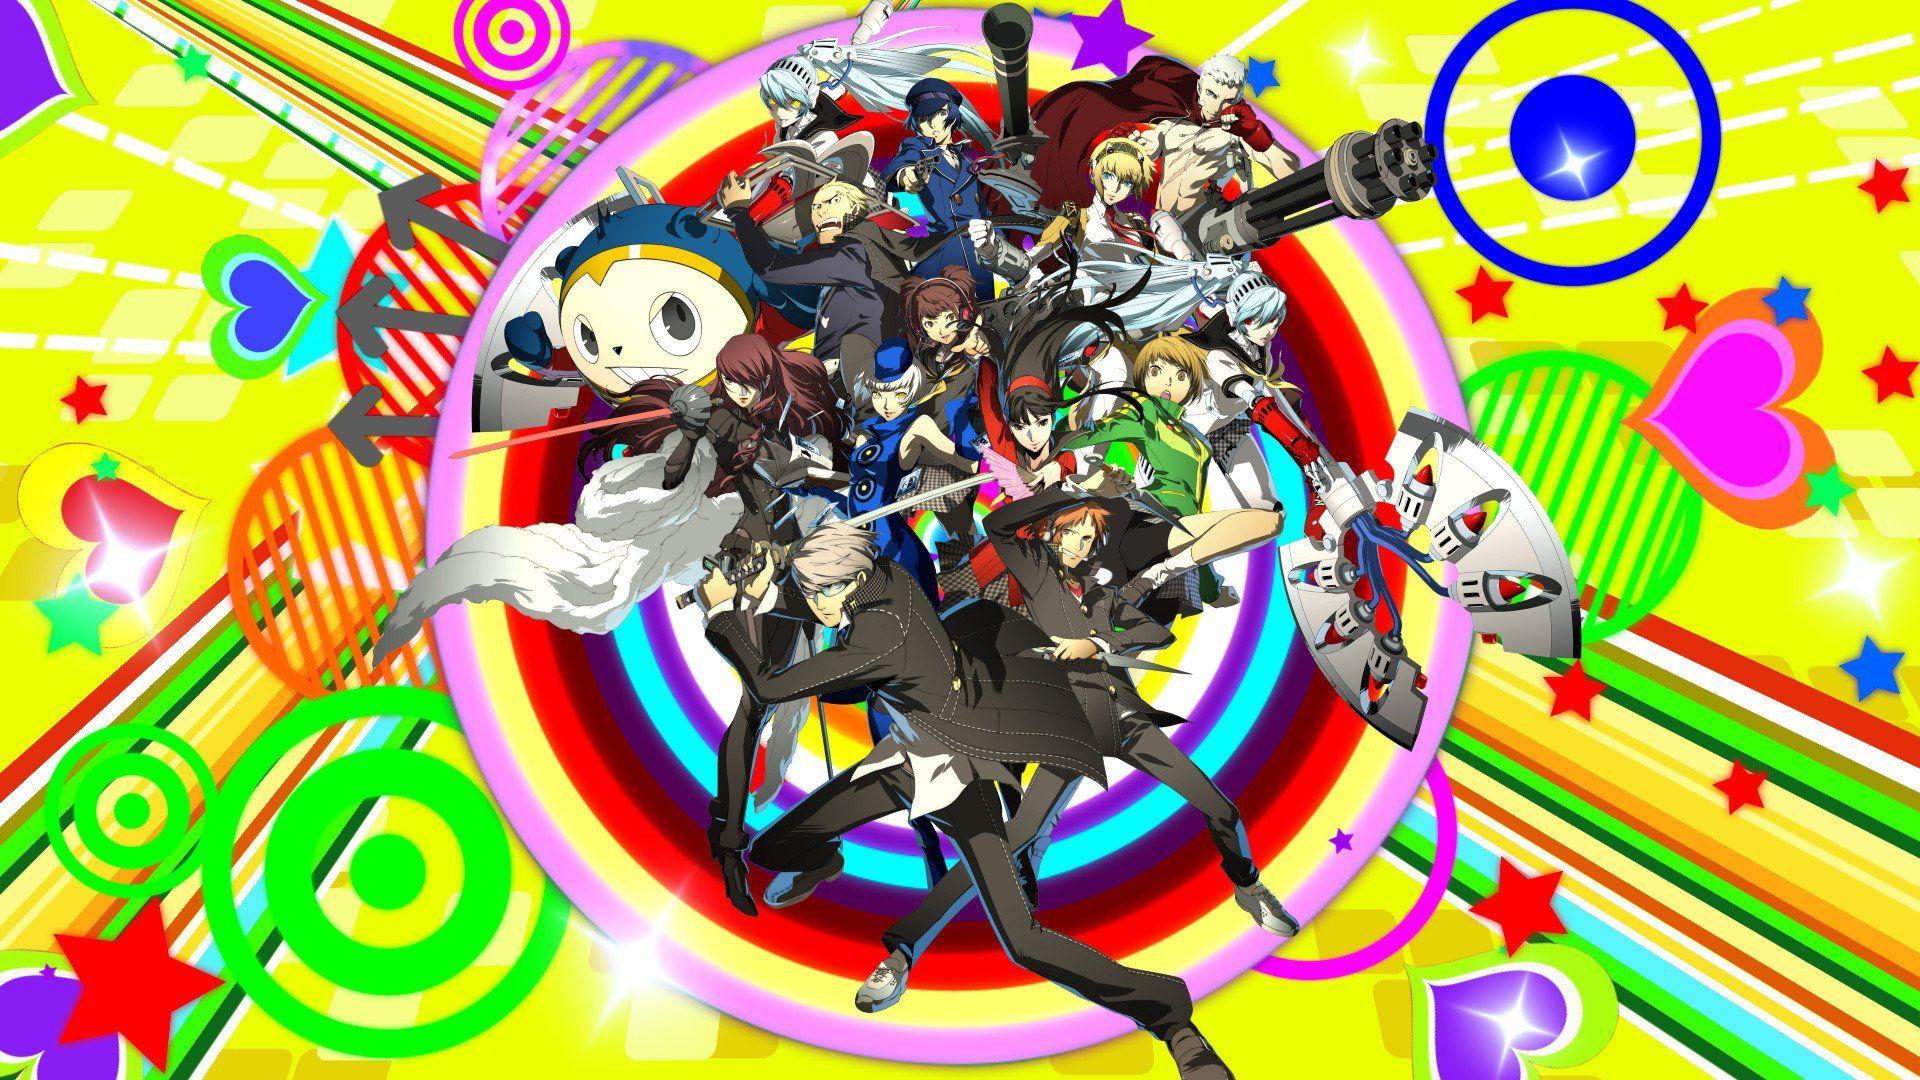 Persona 4 Arena Wallpapers Top Free Persona 4 Arena Backgrounds Wallpaperaccess